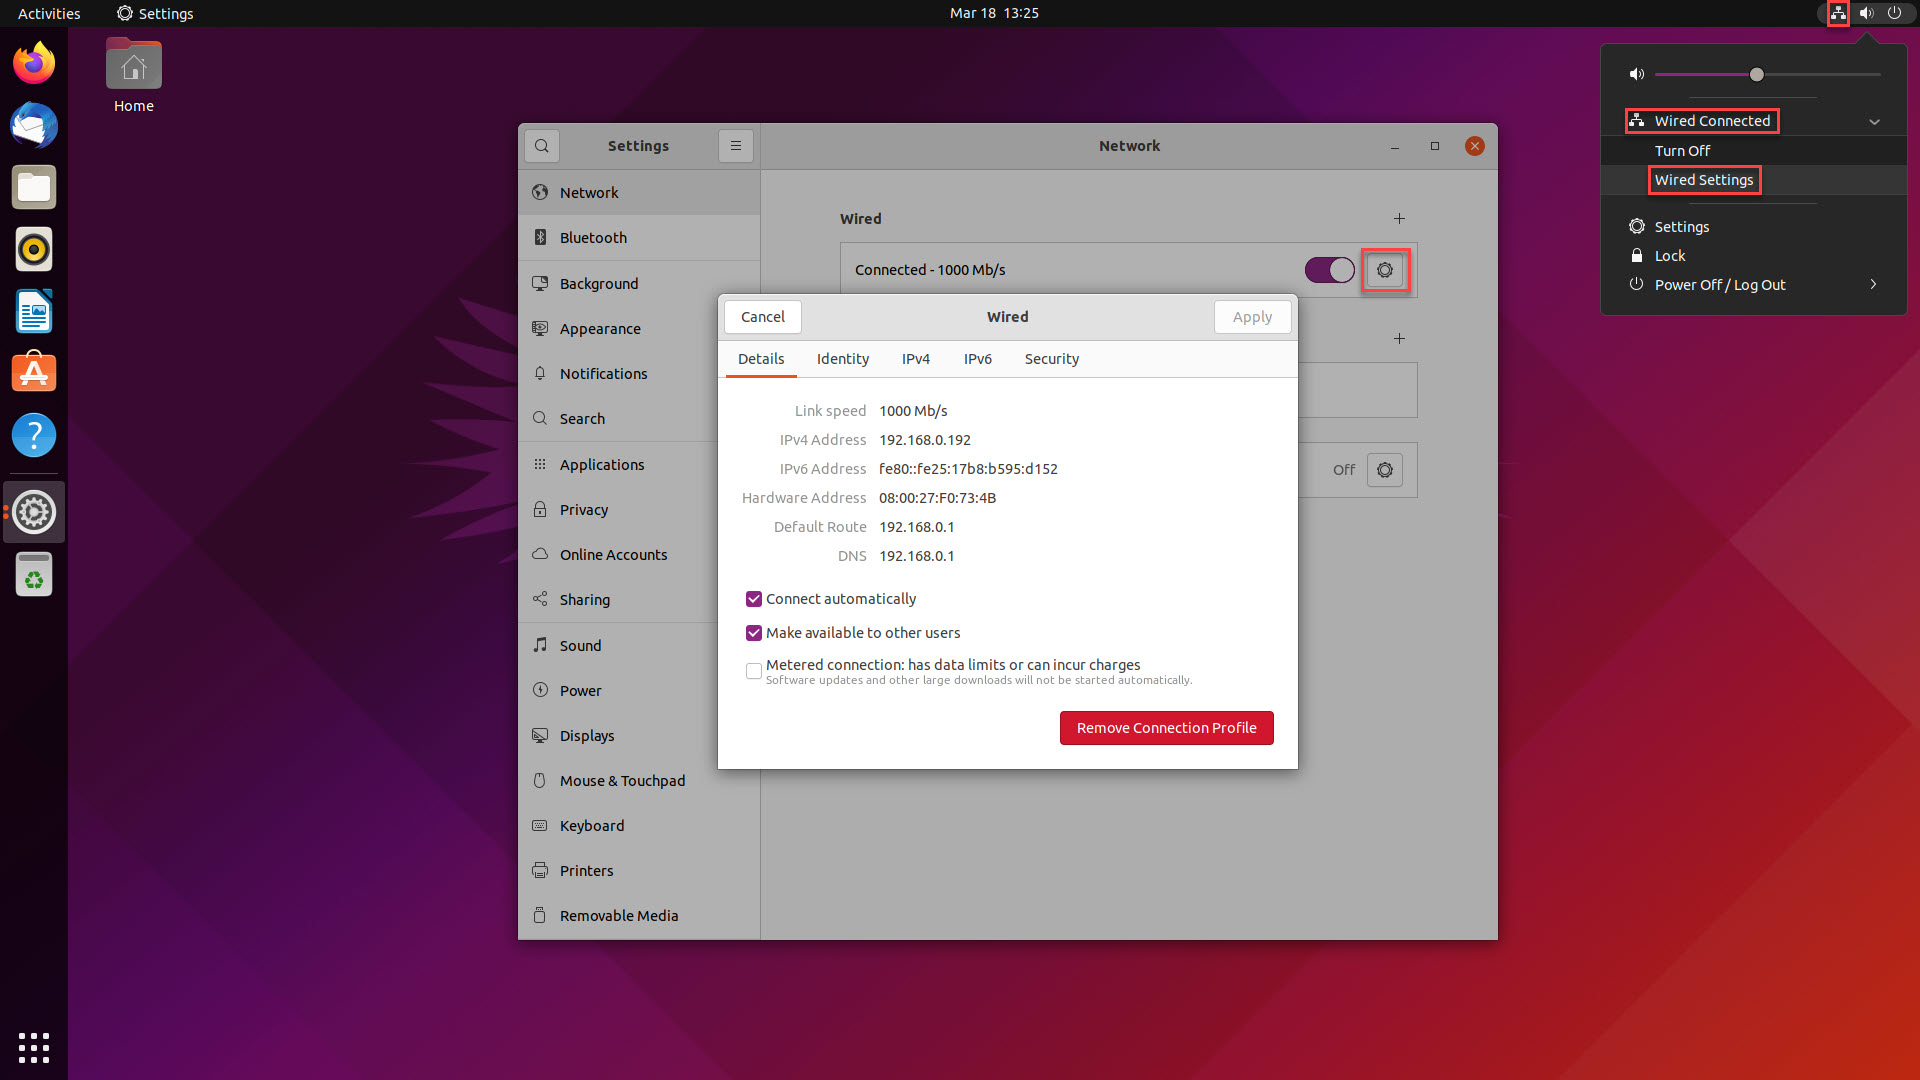 Screenshot of the Ubuntu Network Settings with the relevant UI elements highlighted